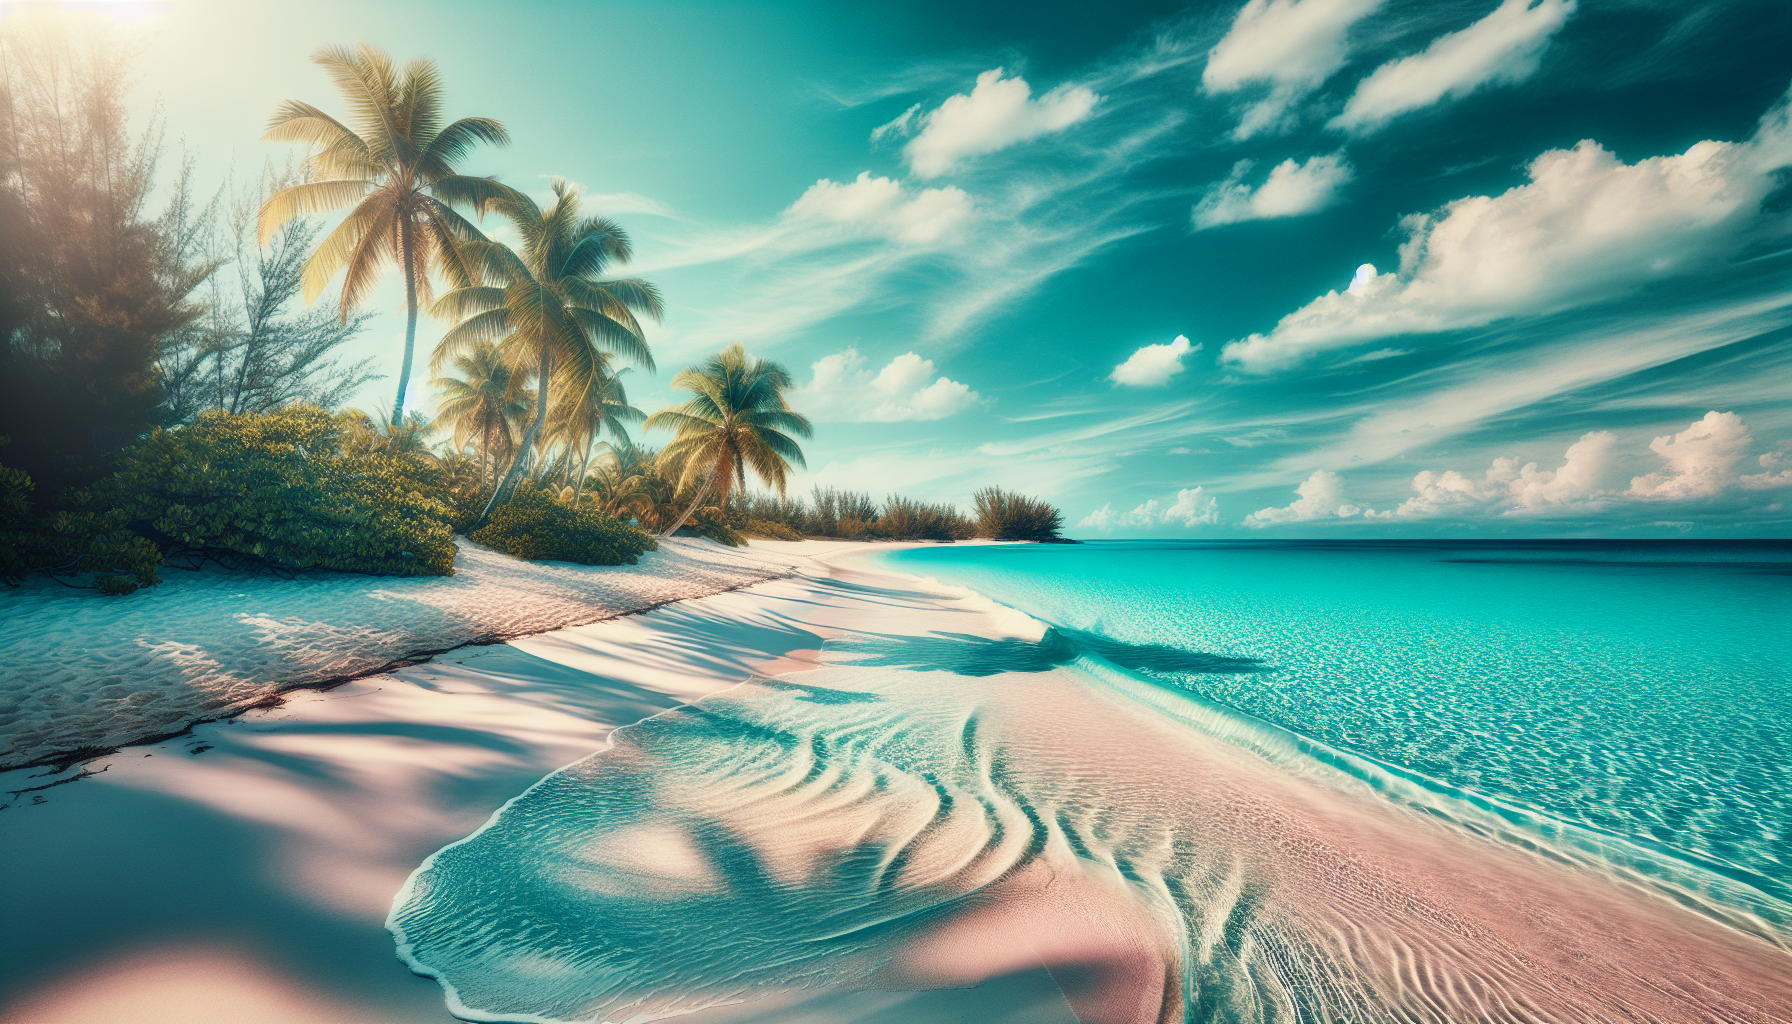 The Bahamas: A Tropical Paradise with Stunning Beaches